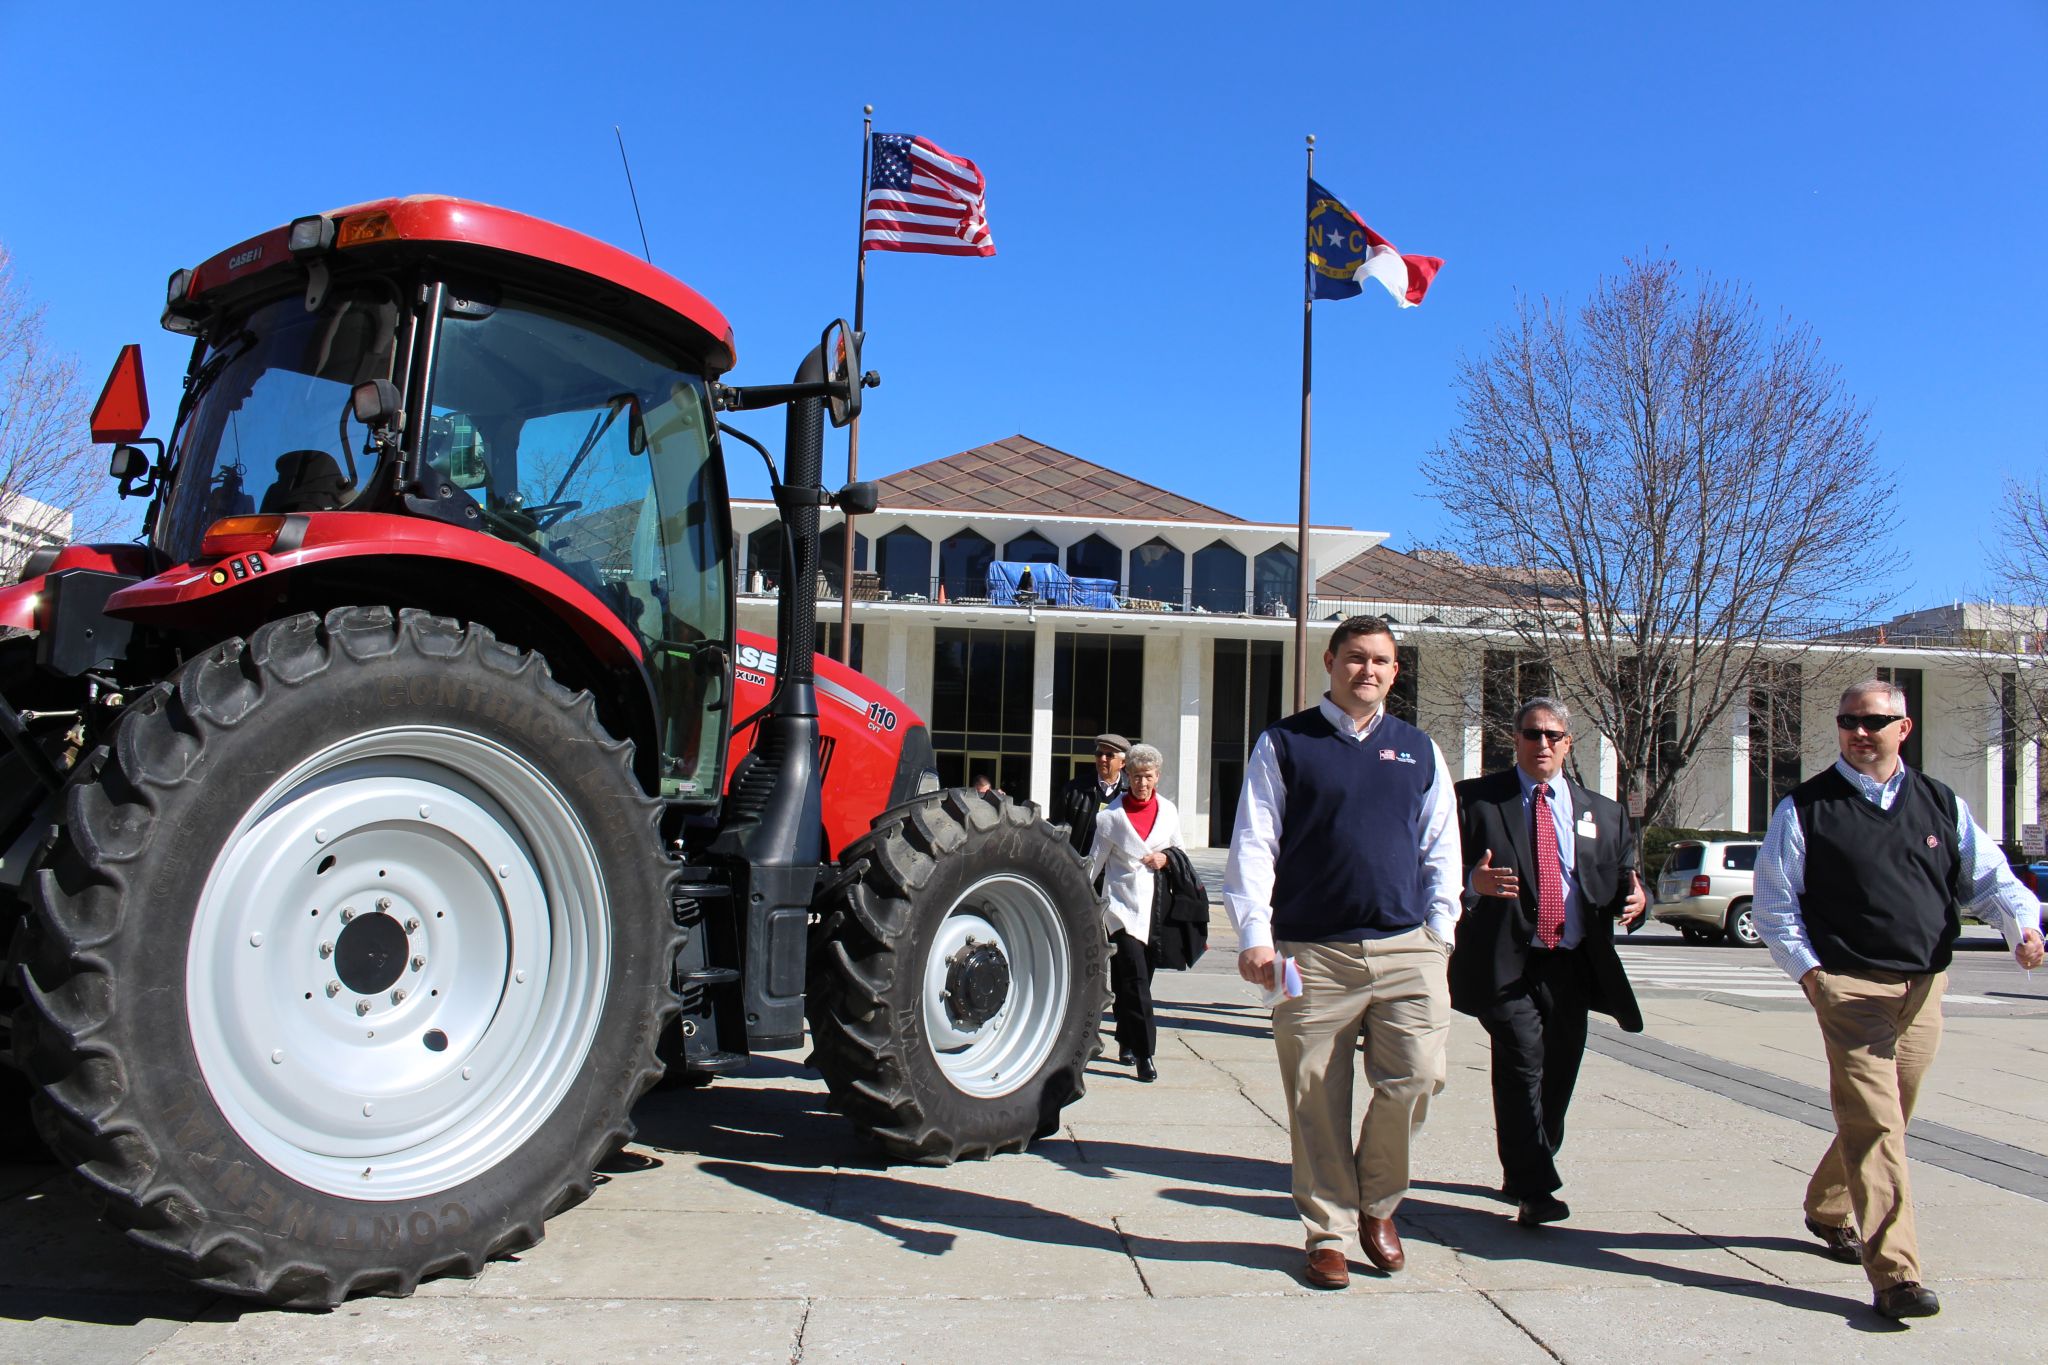 Tractor and people in front of North Carolina legislative building.